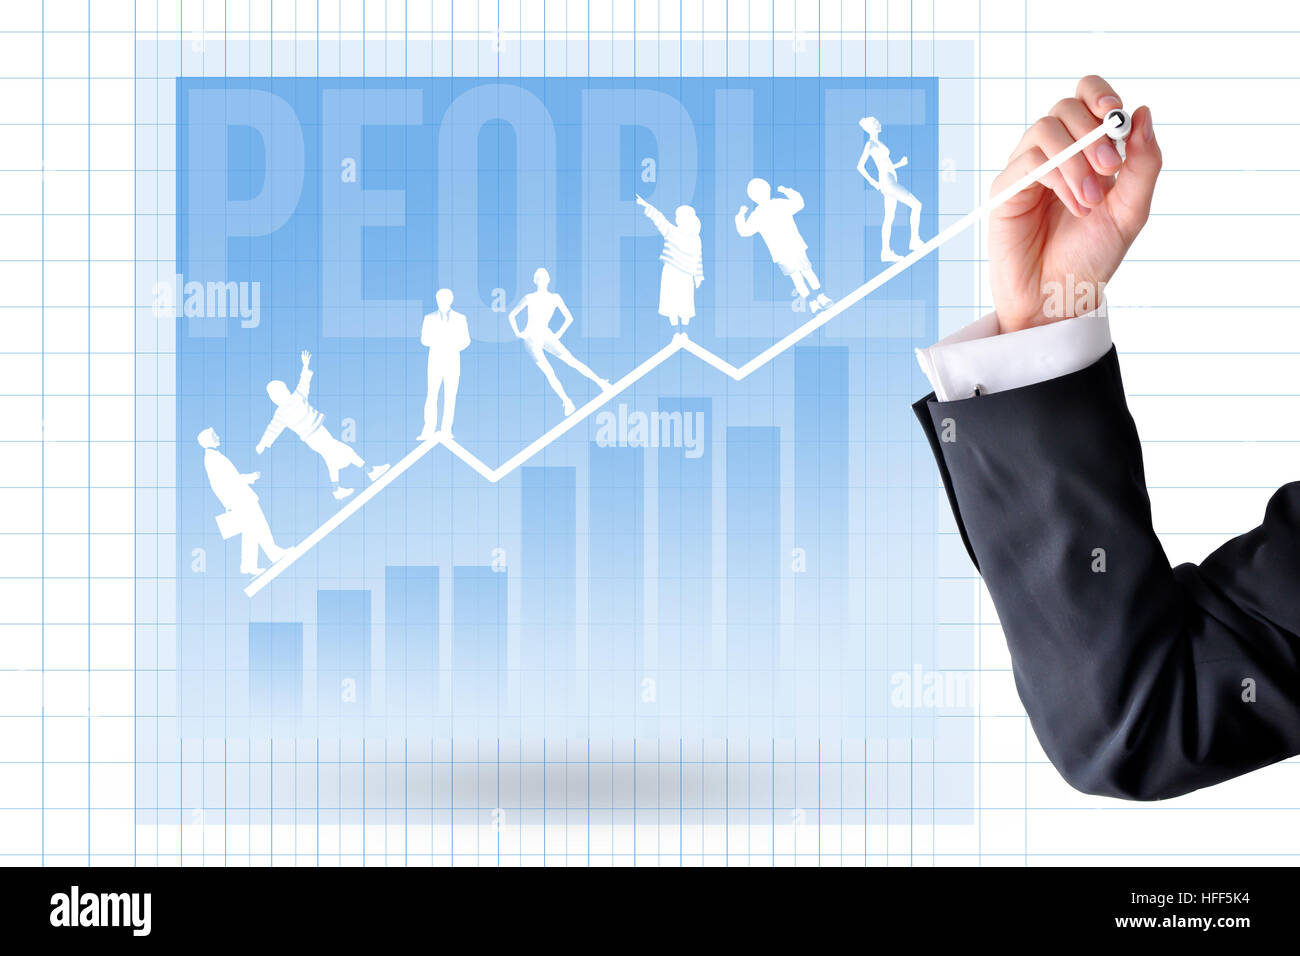 Demographic issues concept with graphic chart Stock Photo